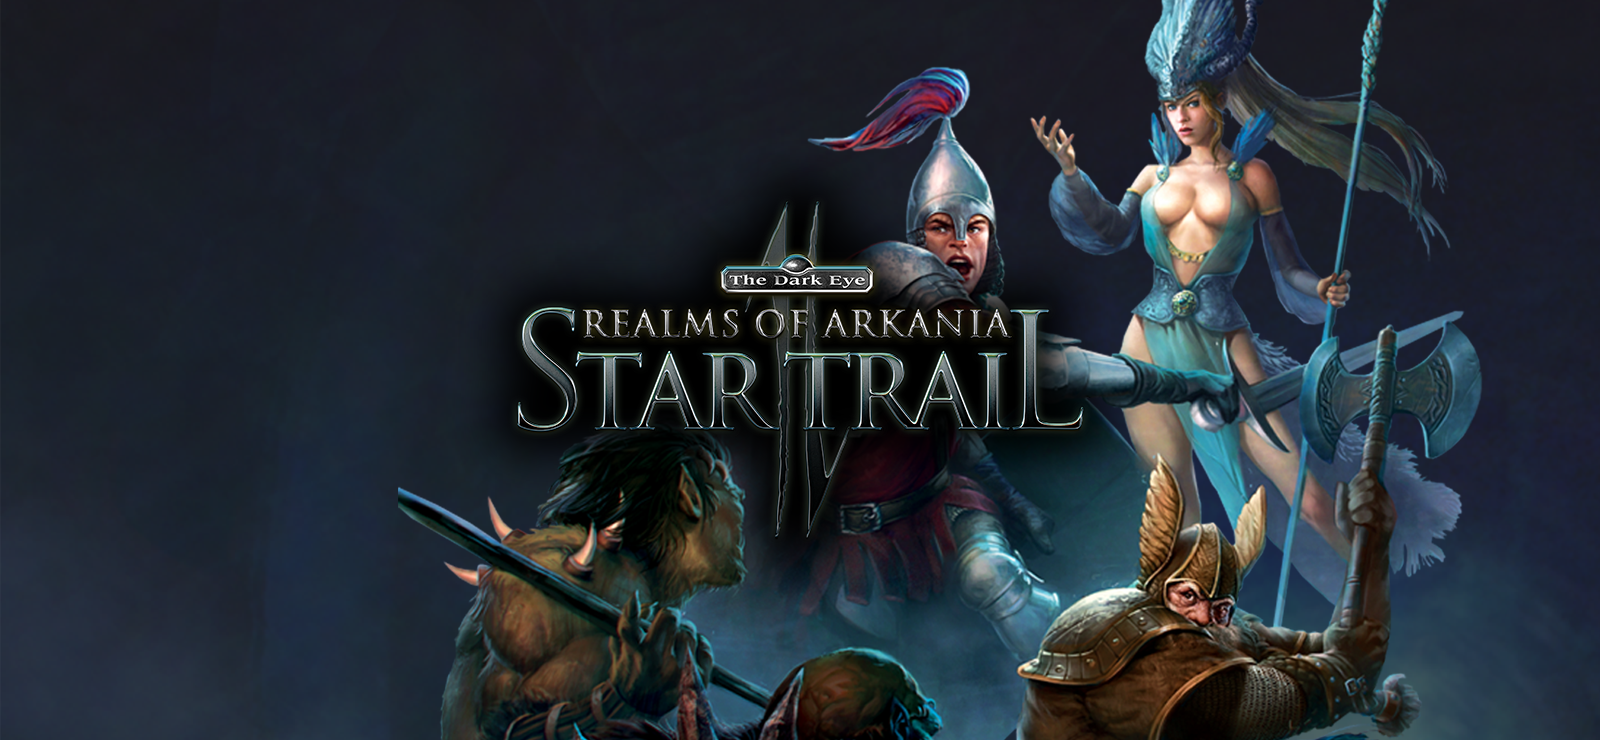 Realms Of Arkania: Star Trail - Digital Deluxe Content